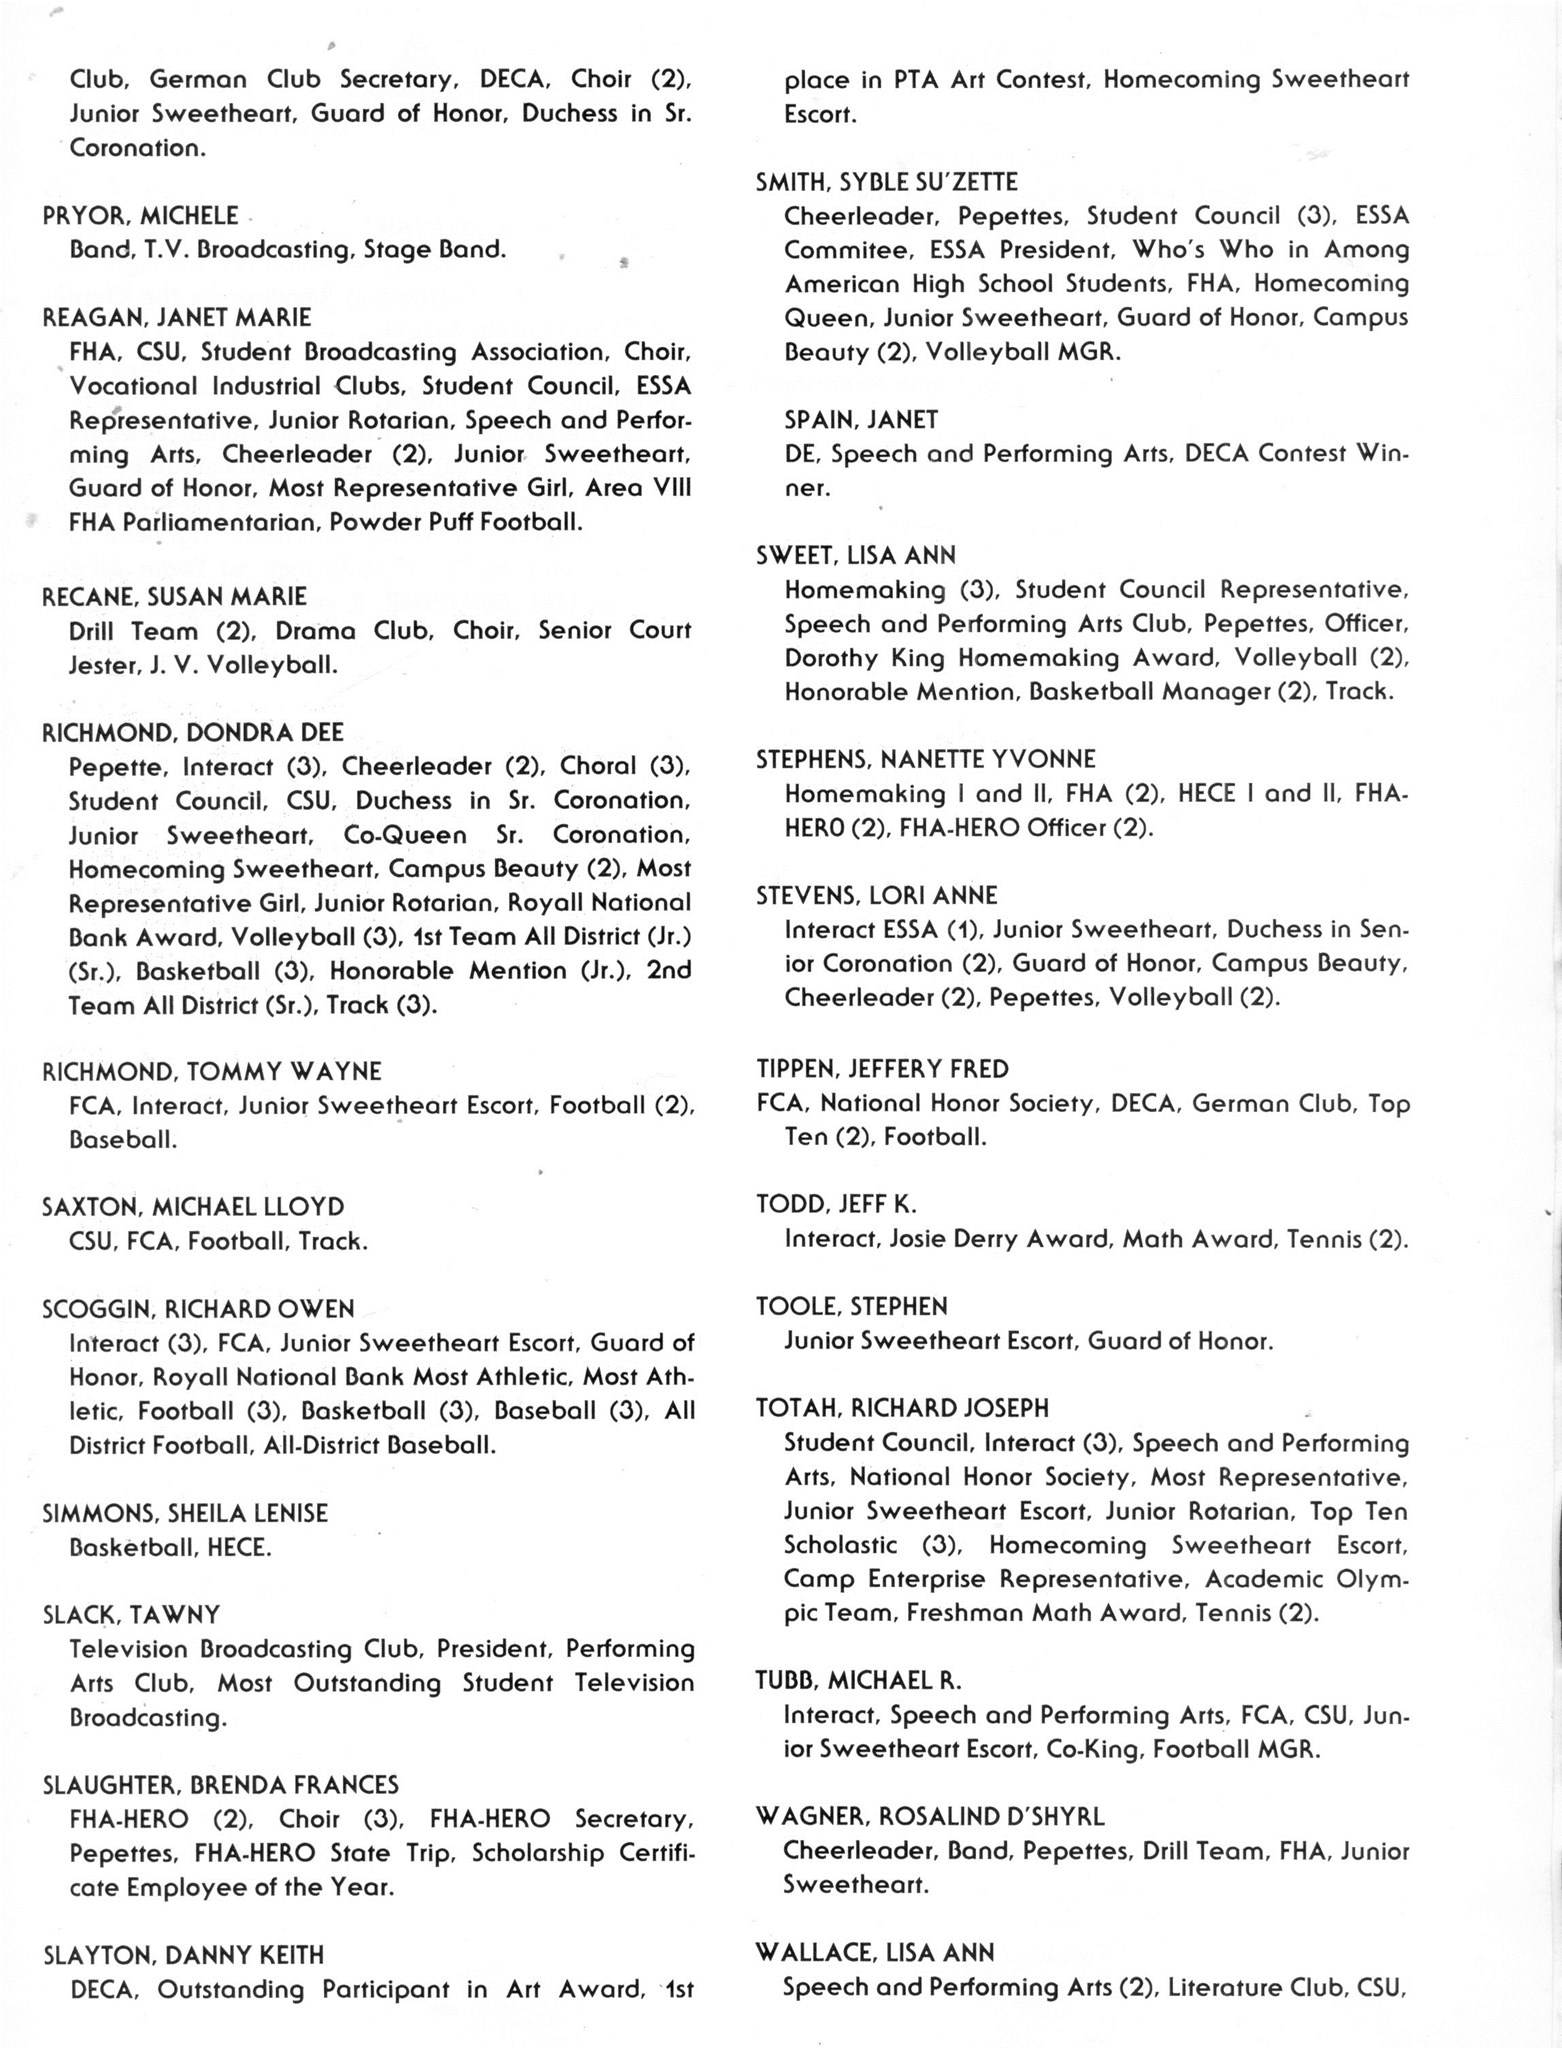 ../../../Images/Large/1982/Arclight-1982-pg0061.jpg